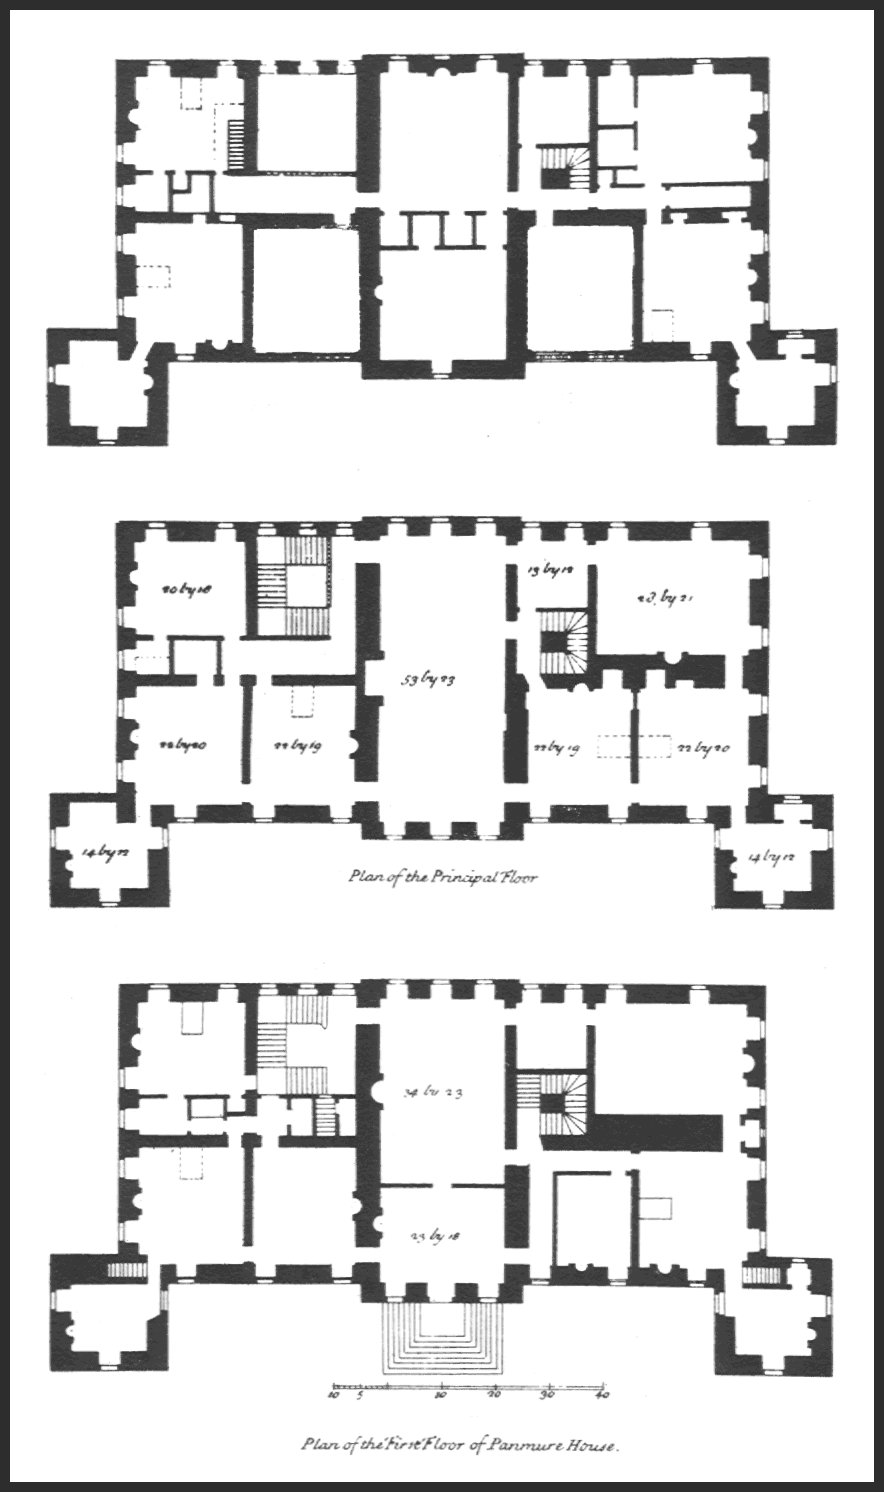 Panmure House Floor Plans (This graphic may be enlarged)